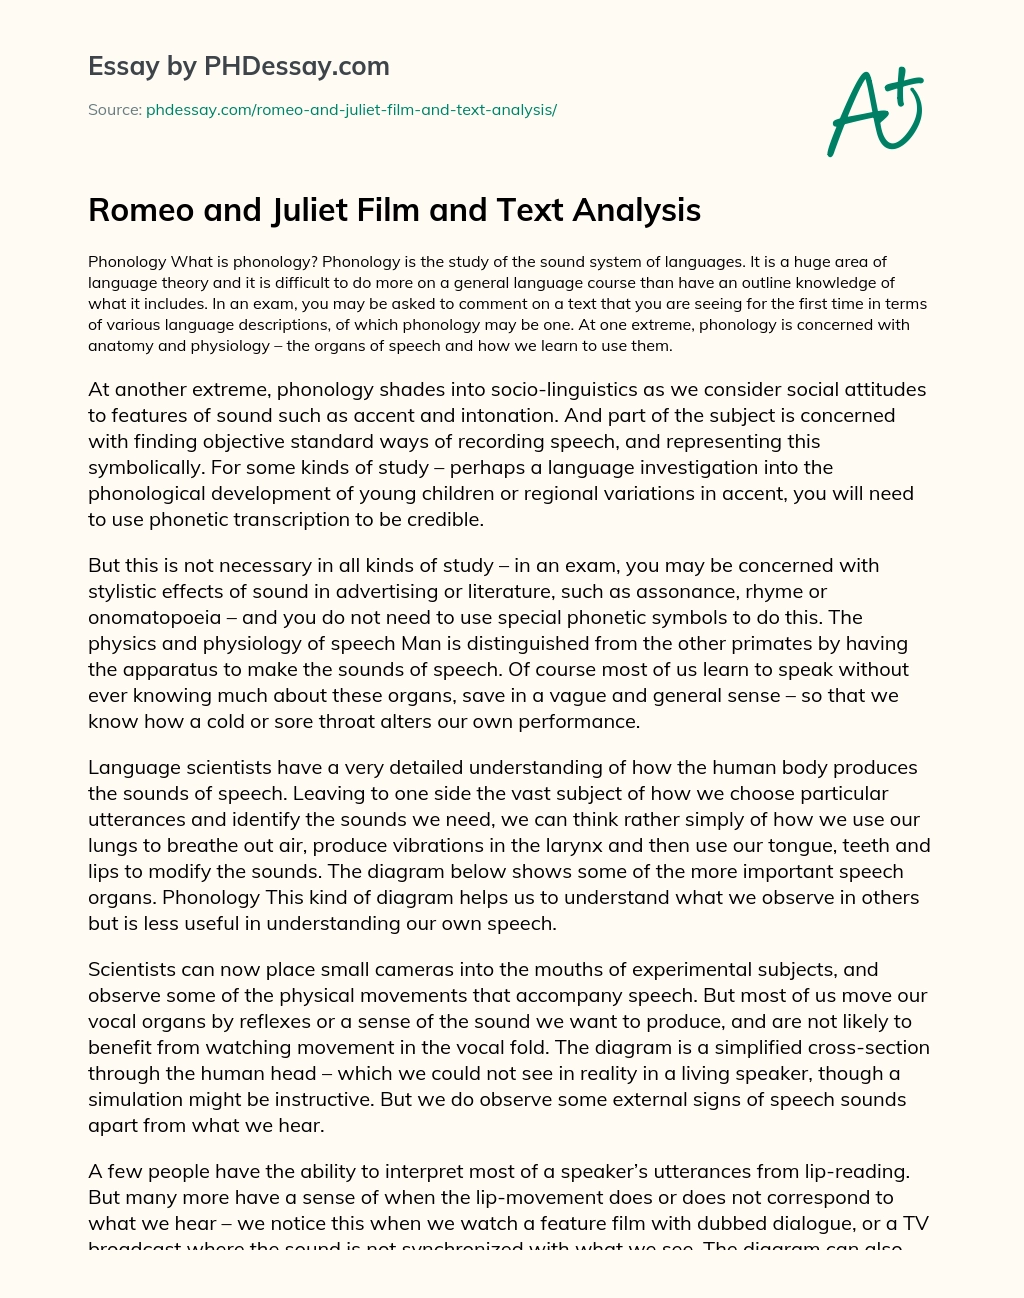 Romeo And Juliet Film And Text Analysis Phdessay Com